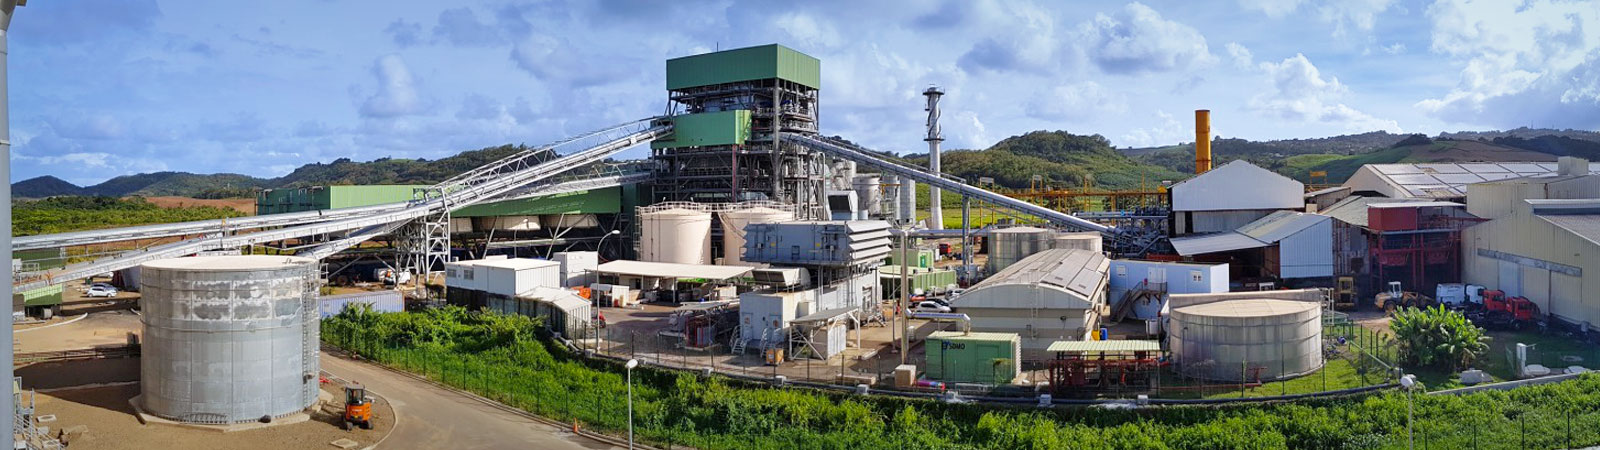 Construction of the first all-biomass power plant in Martinique